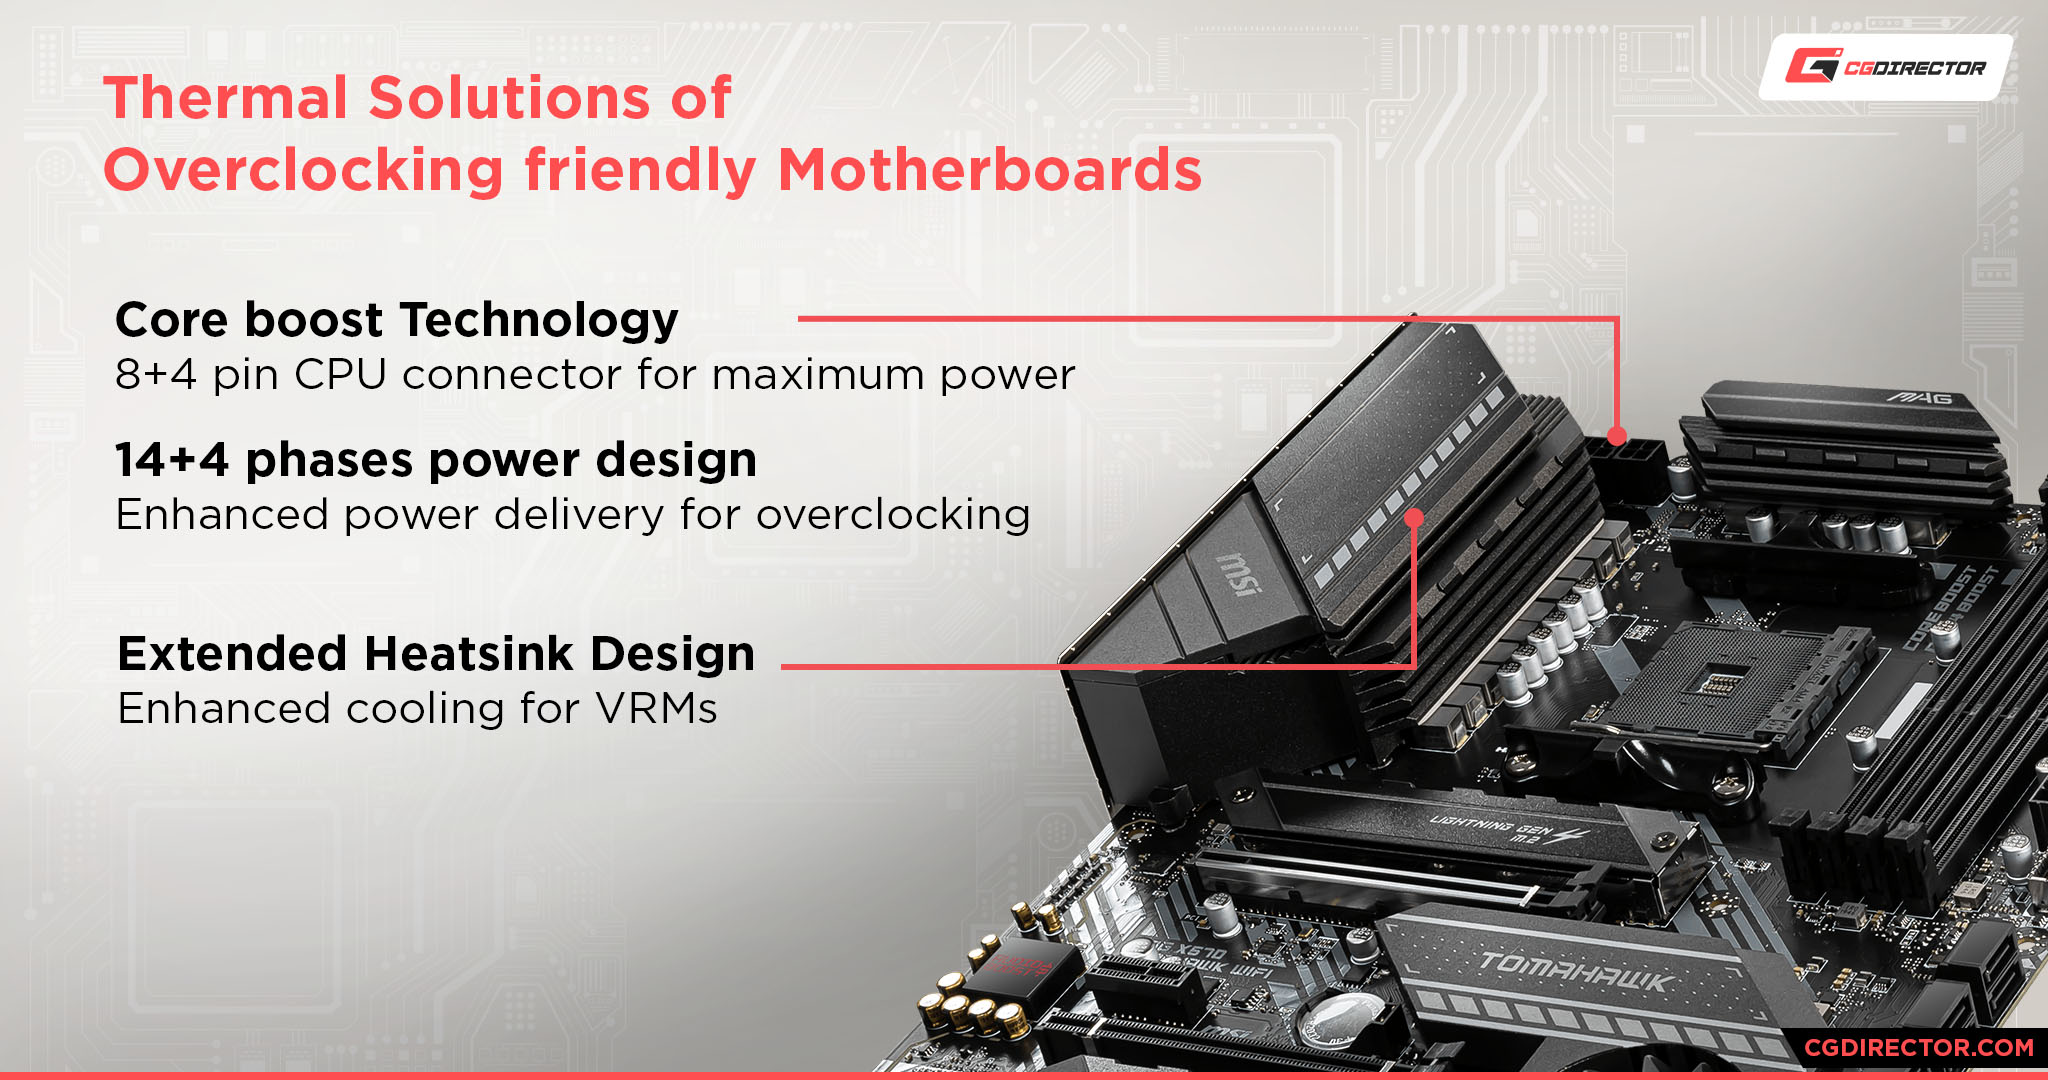 Thermal Solutions of overclocking friendly motherboards